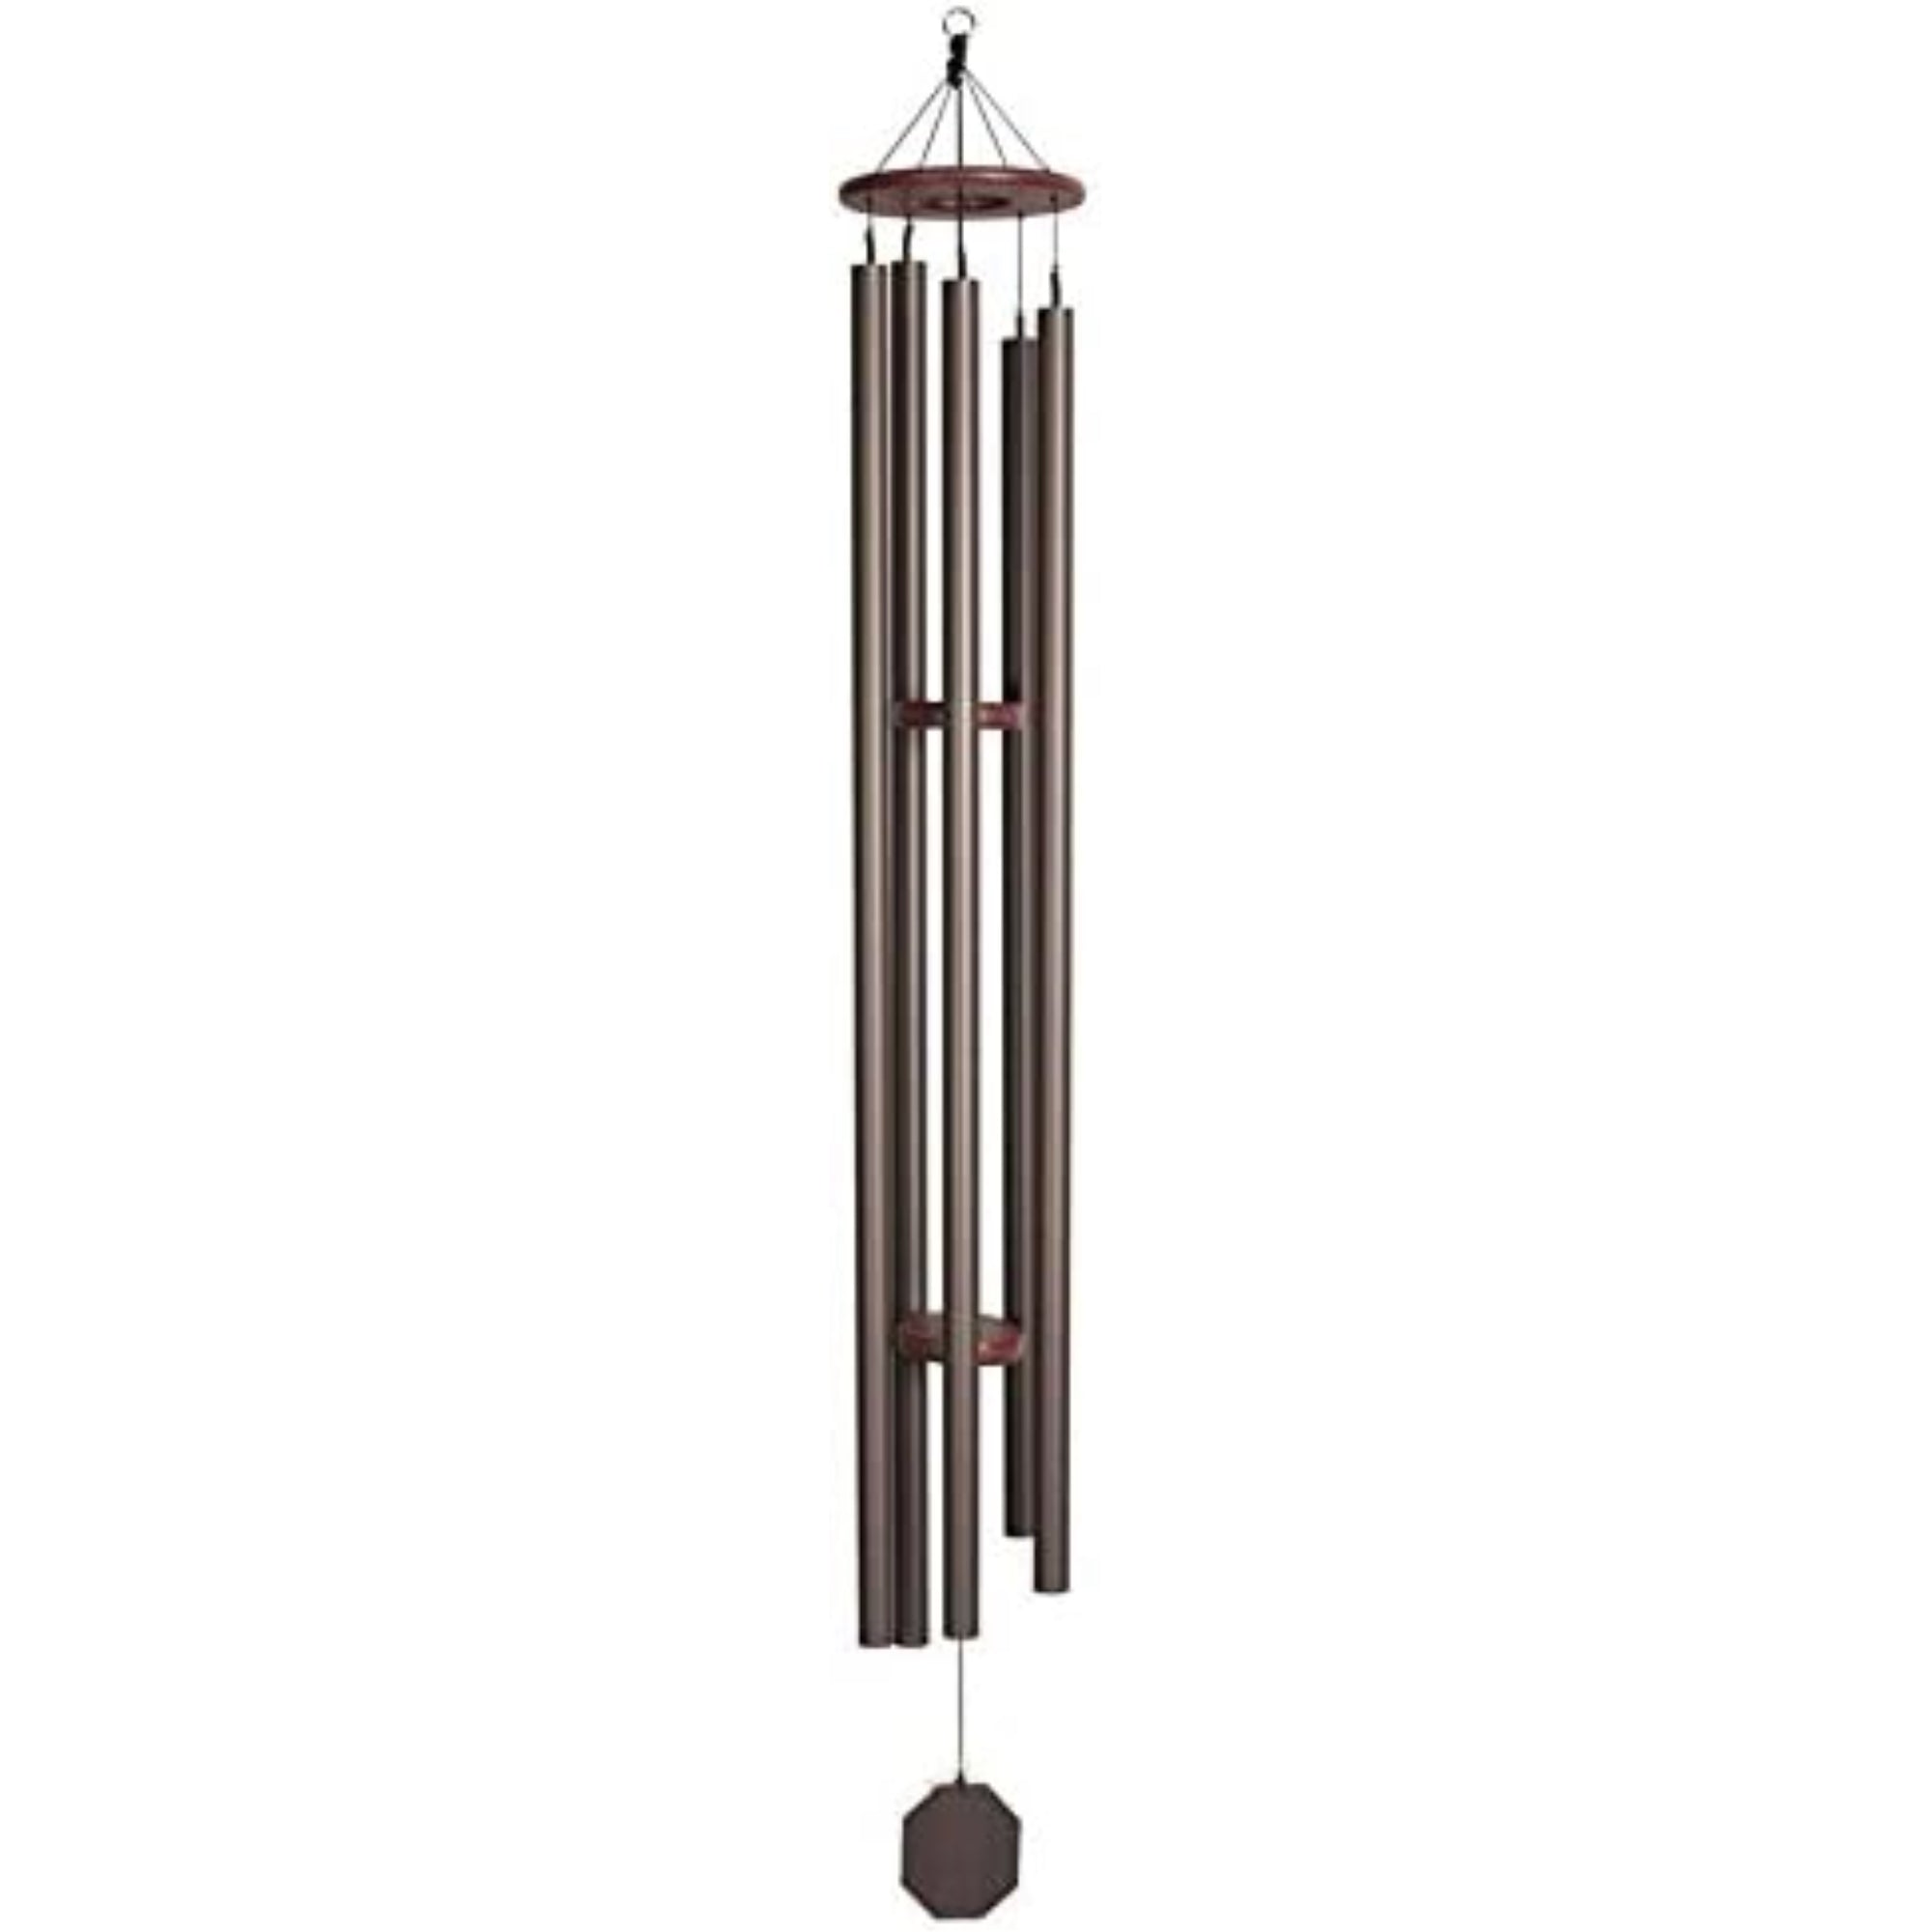 Lambright Country Chimes Amish Crafted Wind Chime, Terra, Big Ben 82"